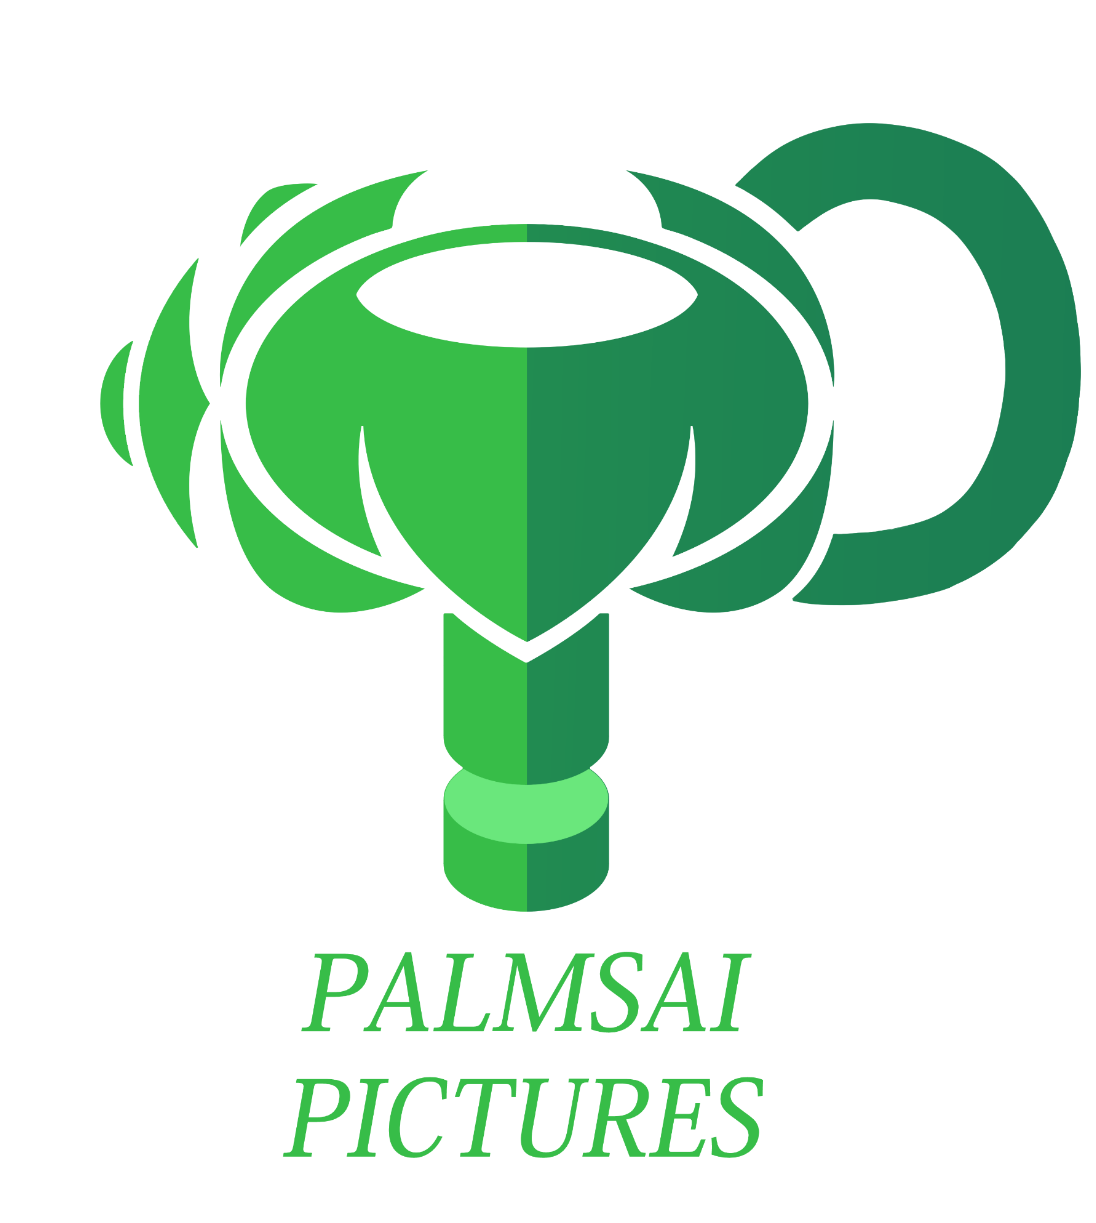 Palmsai Pictures